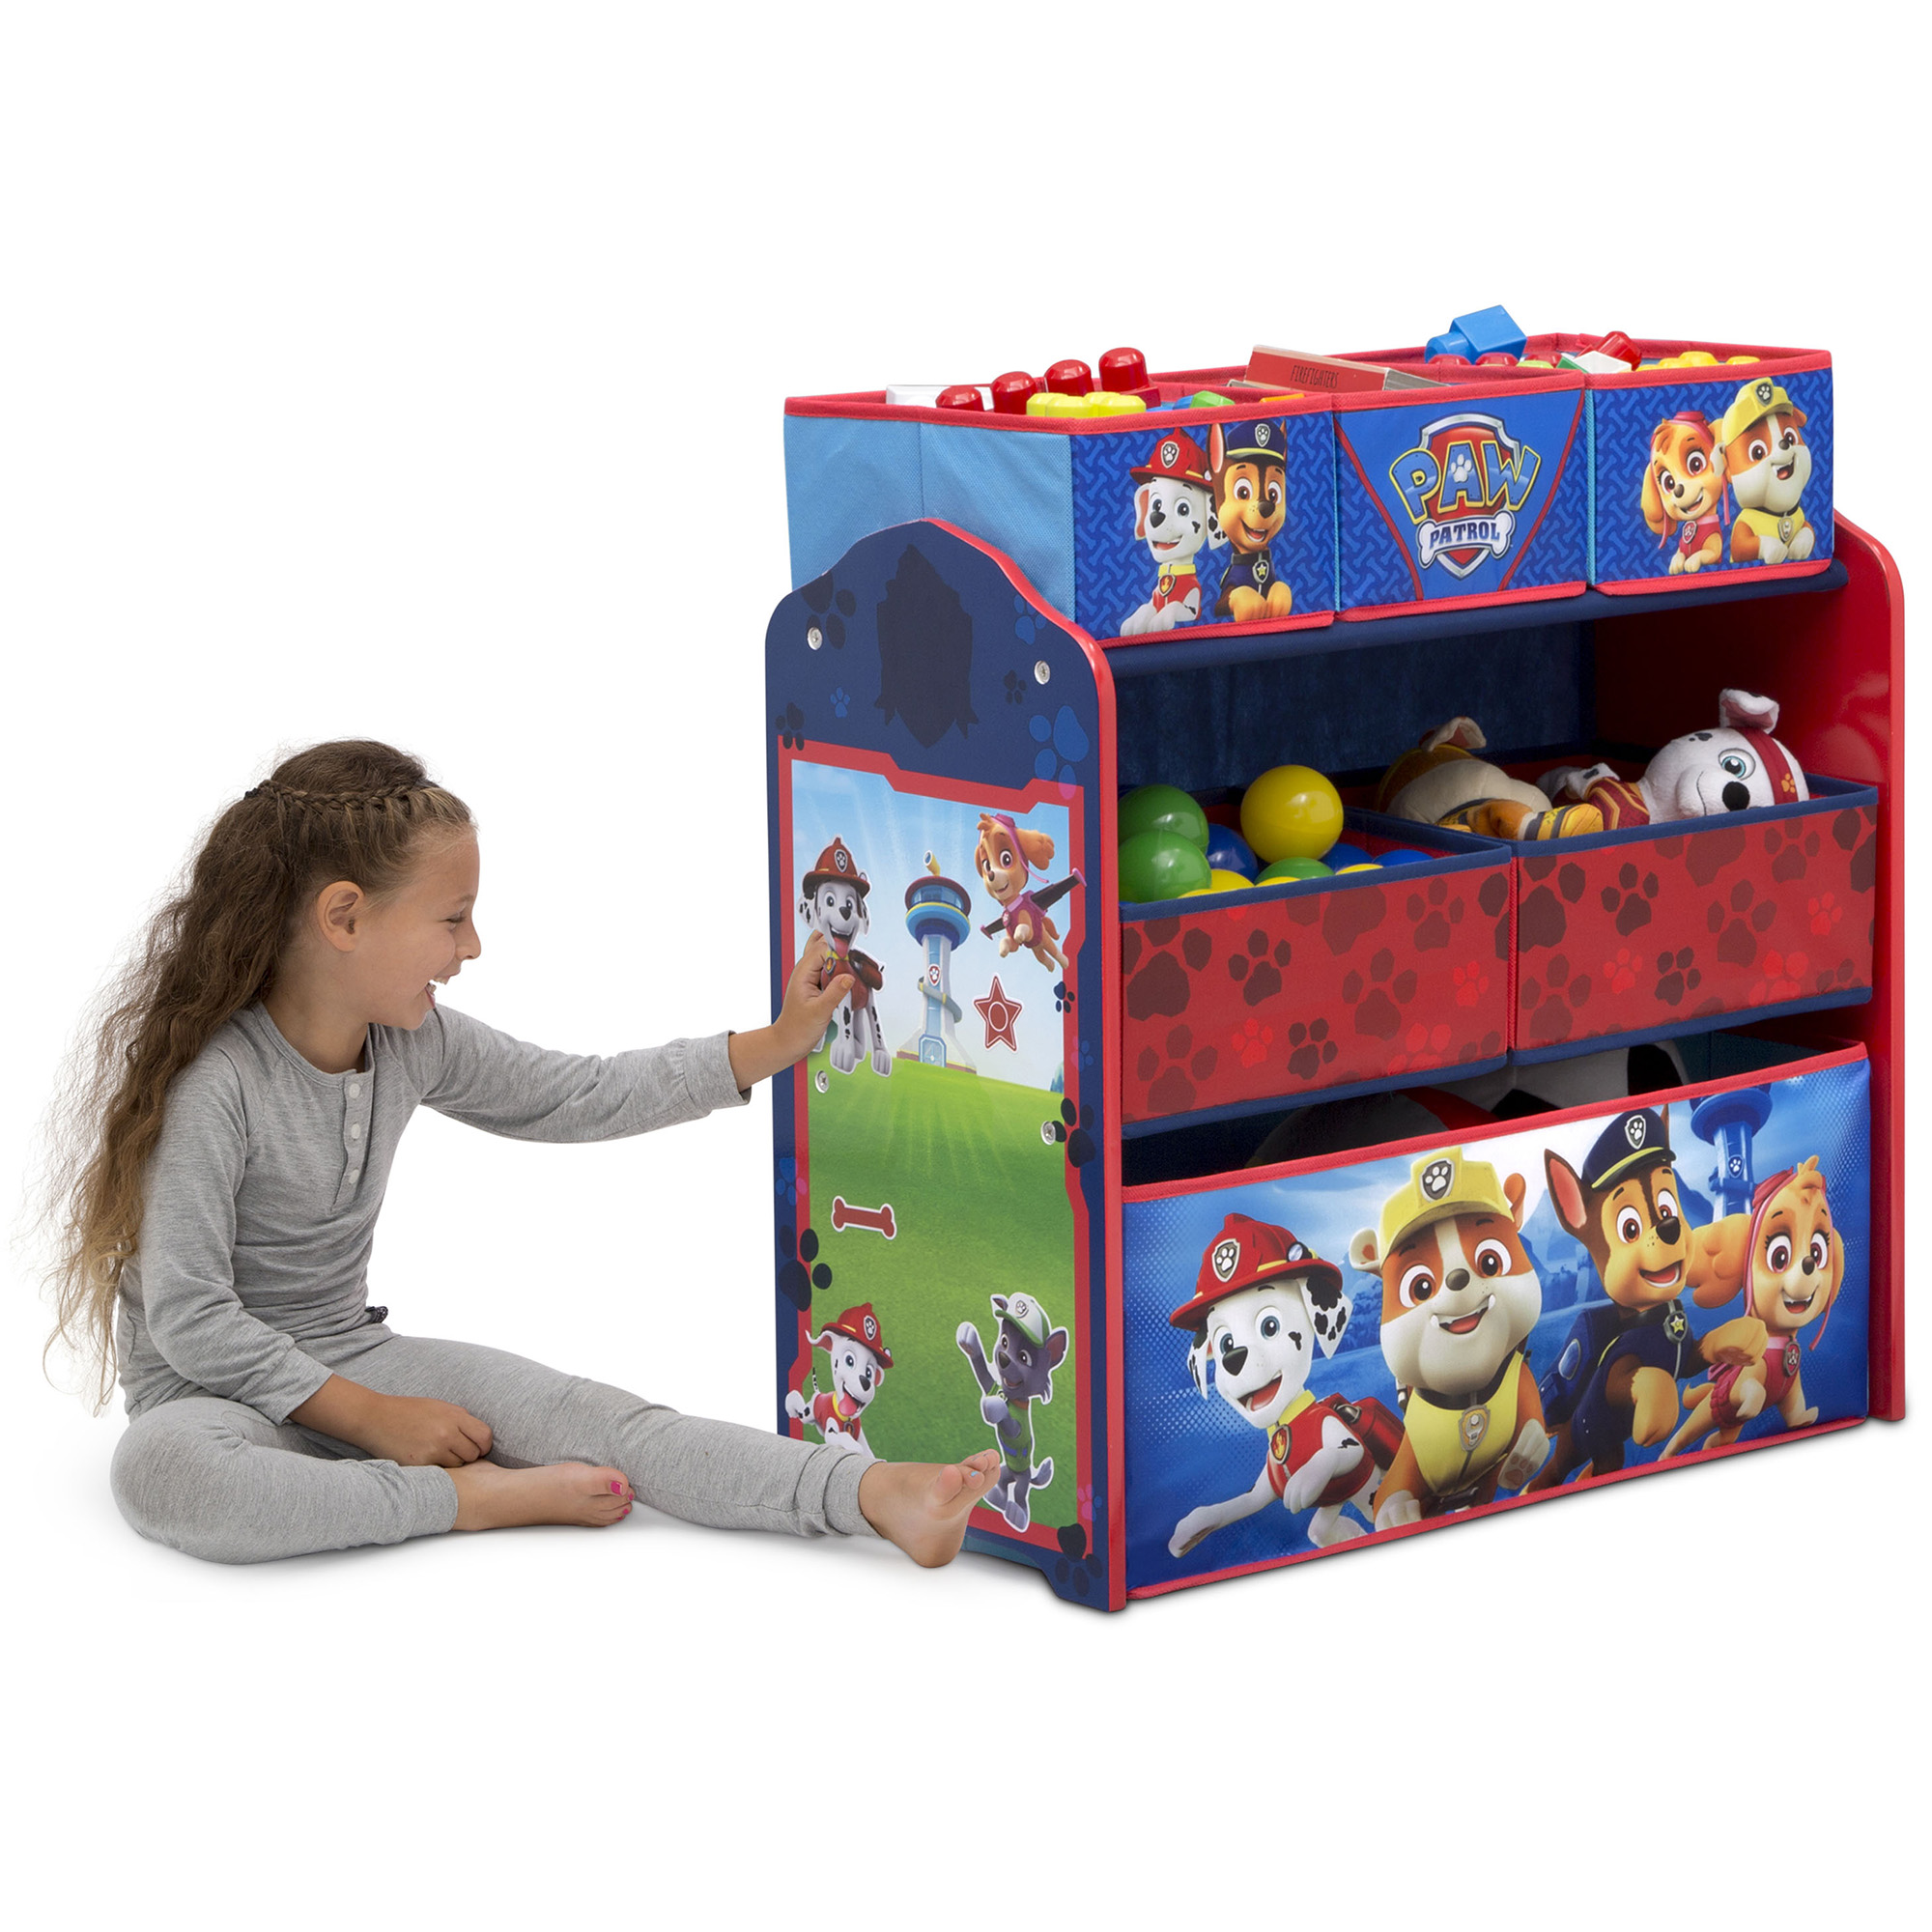 Nick Jr. PAW Patrol 4-Piece Room-in-a-Box Bedroom Set by Delta Children - Includes Sleep & Play Toddler Bed, 6 Bin Design & Store Toy Organizer and Desk with Chair - image 4 of 14